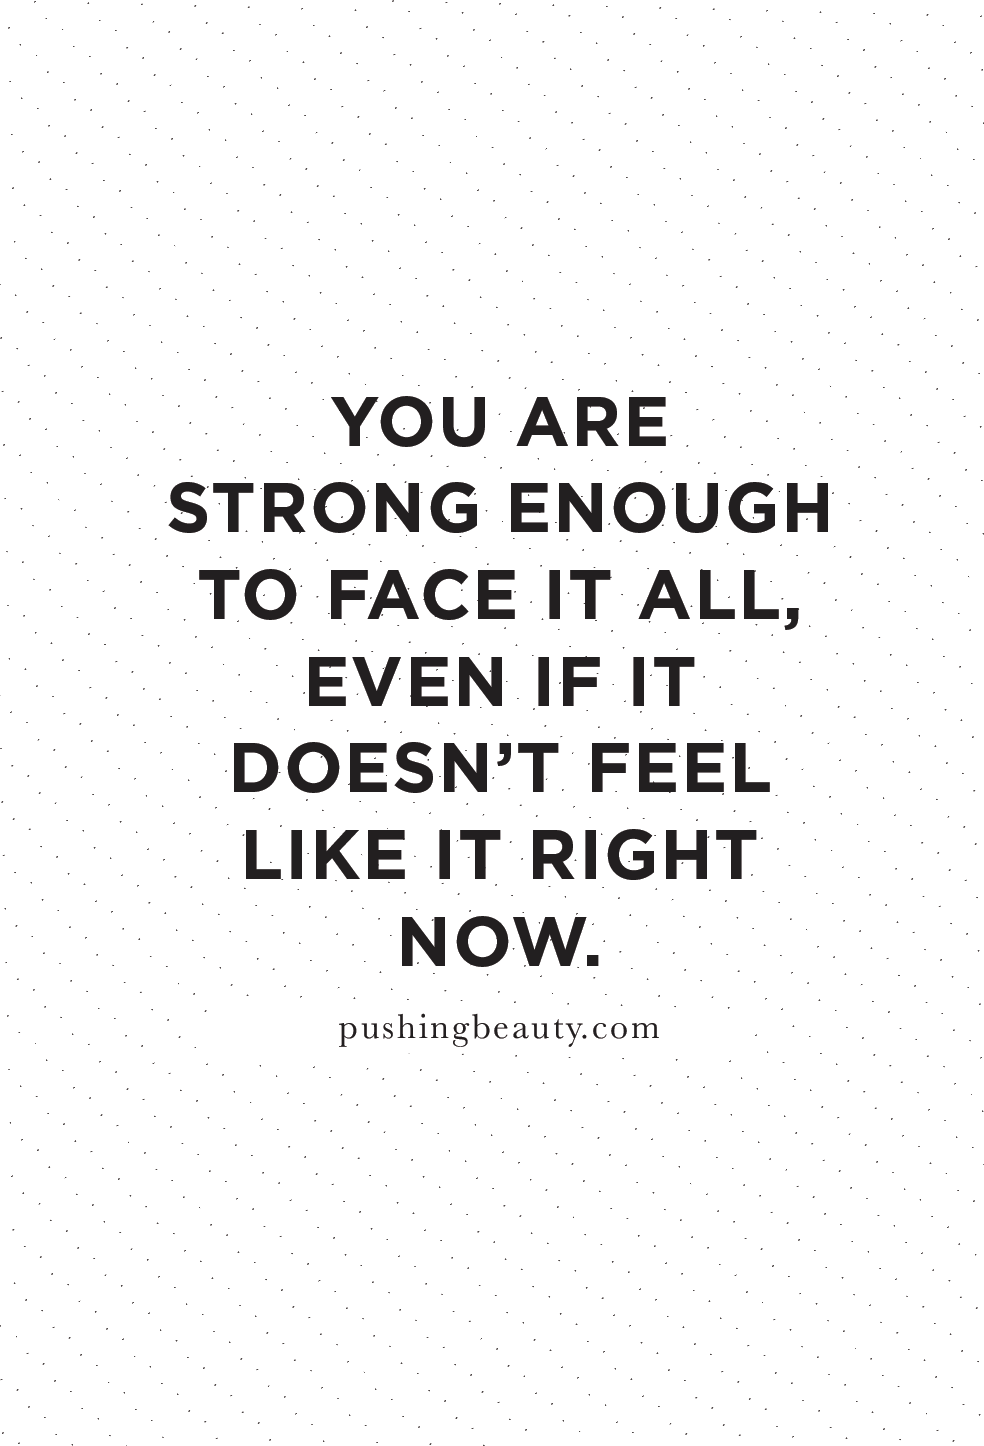 You are strong enough to face it all, even if it doesn’t feel like it right now.